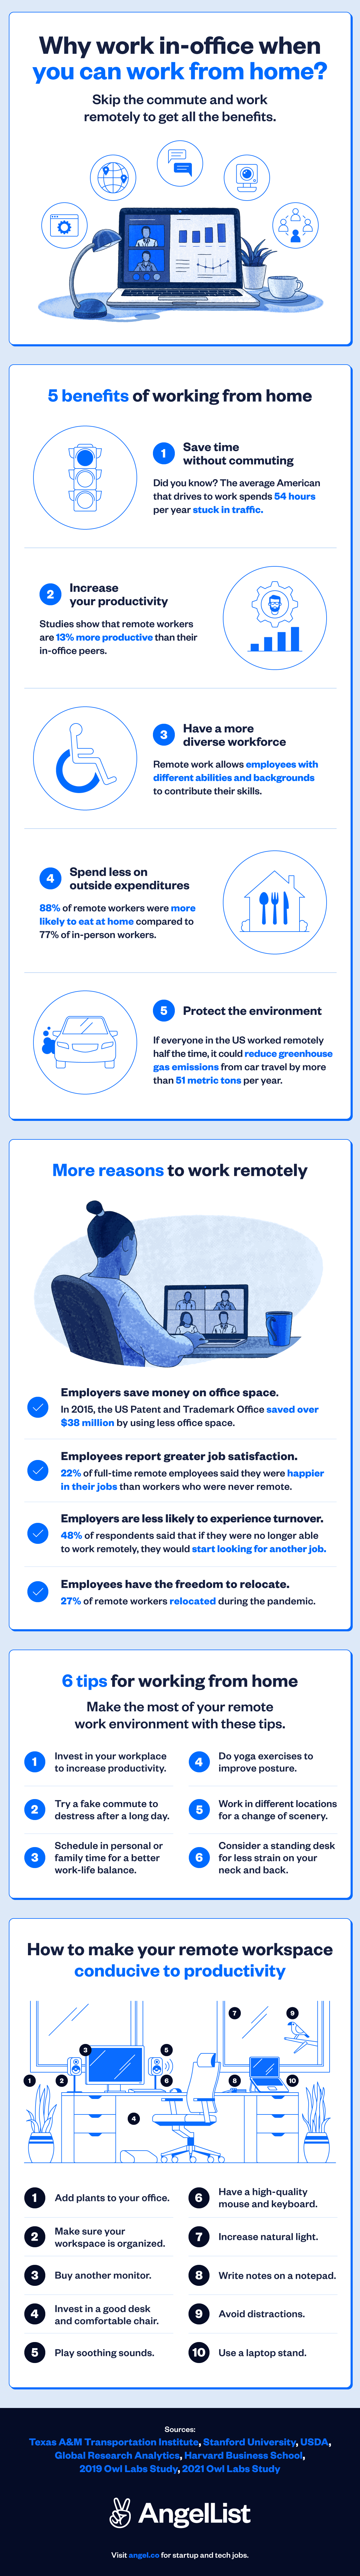 9 Work-From-Home Benefits (and 5 Disadvantages)